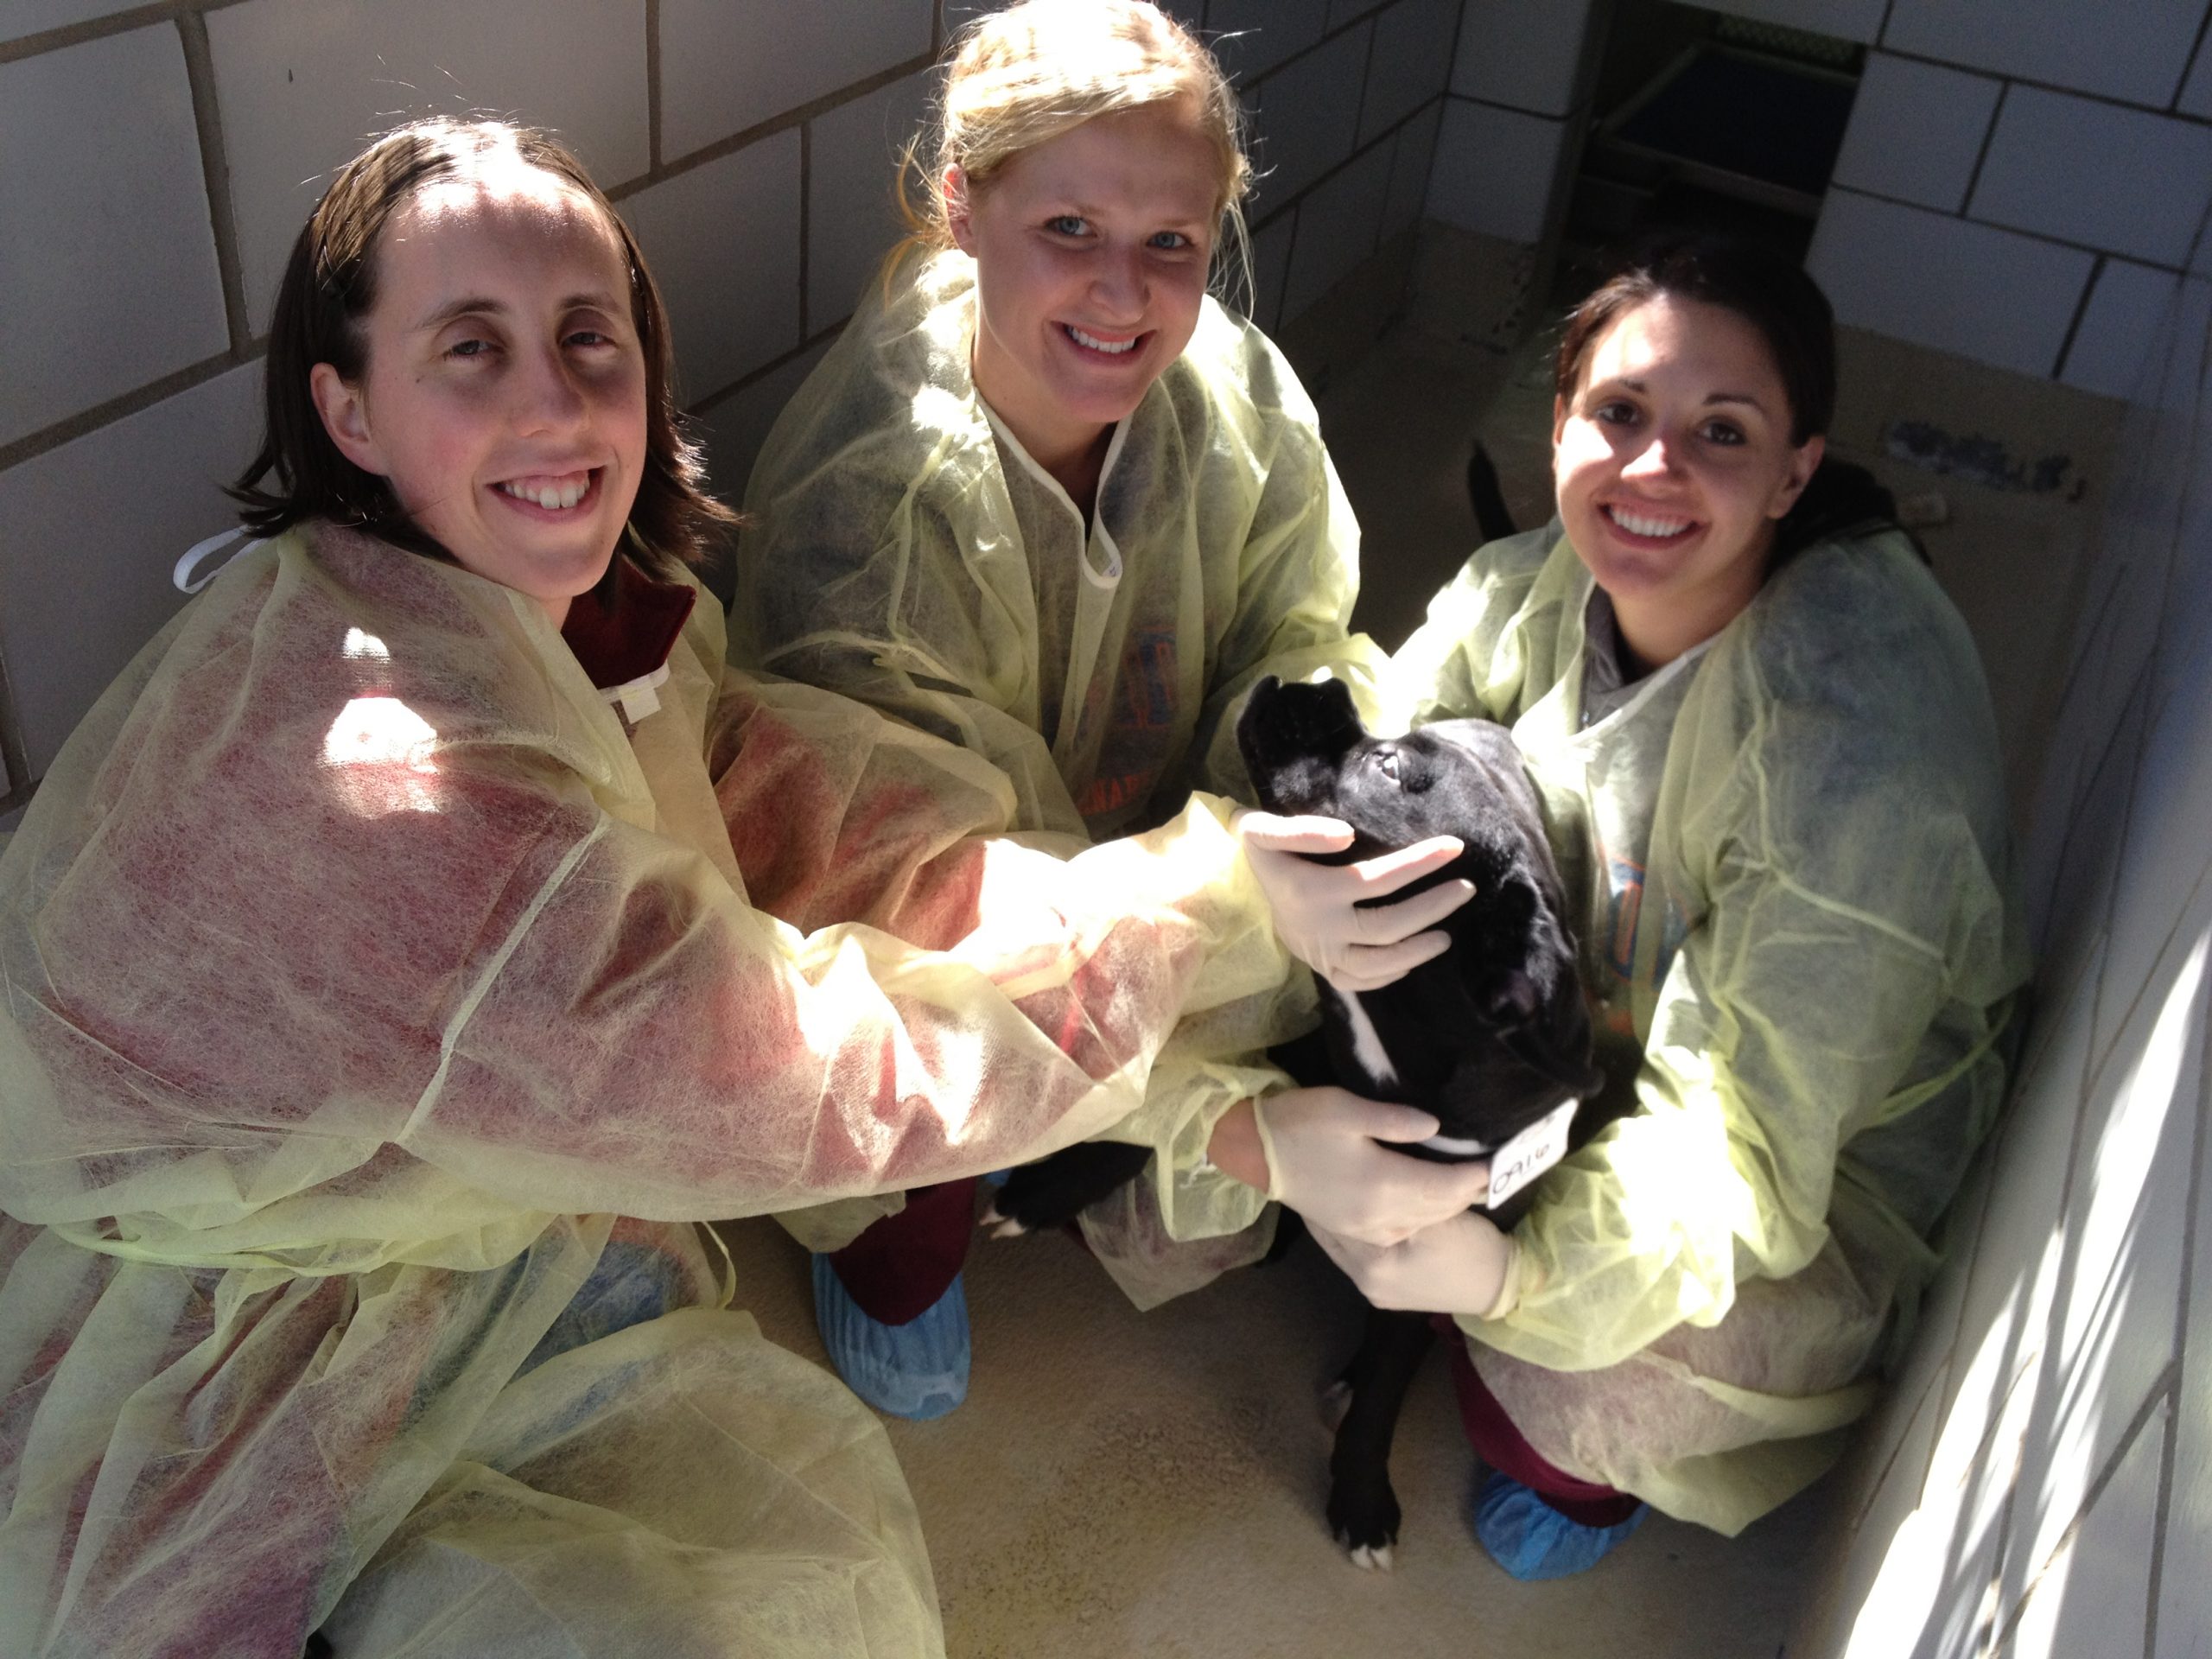 Three shelter staff members in yellow gowns hande a black do in a kennel